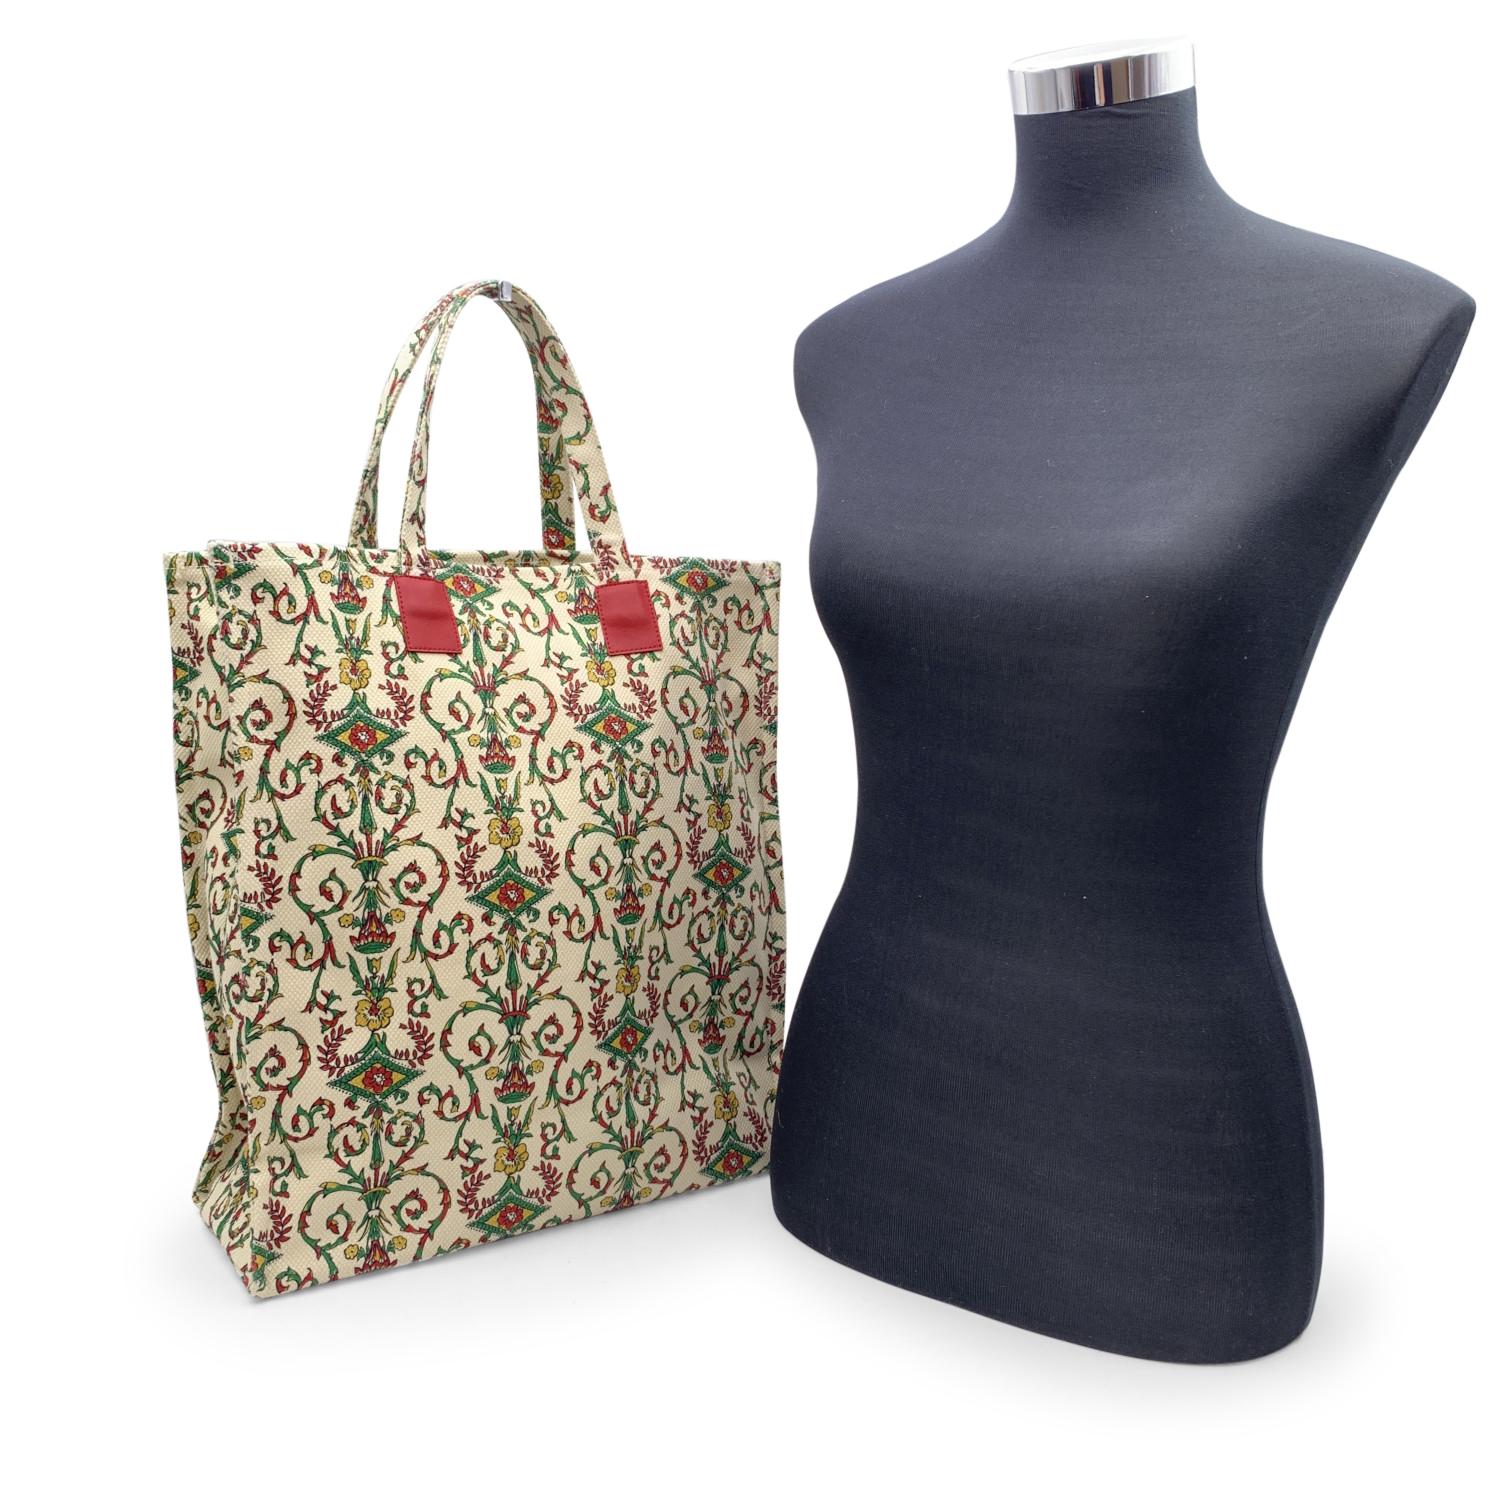 Beautiful Gucci Garden tote, exclusively sold at the Gucci museum (aka Gucci Garden) in Florence. The bag features a multicolored archive printed cotton canvas. Open top. Double flat handles. Unlined. Red 'Firenze 1921 - Piazza della Signoria'